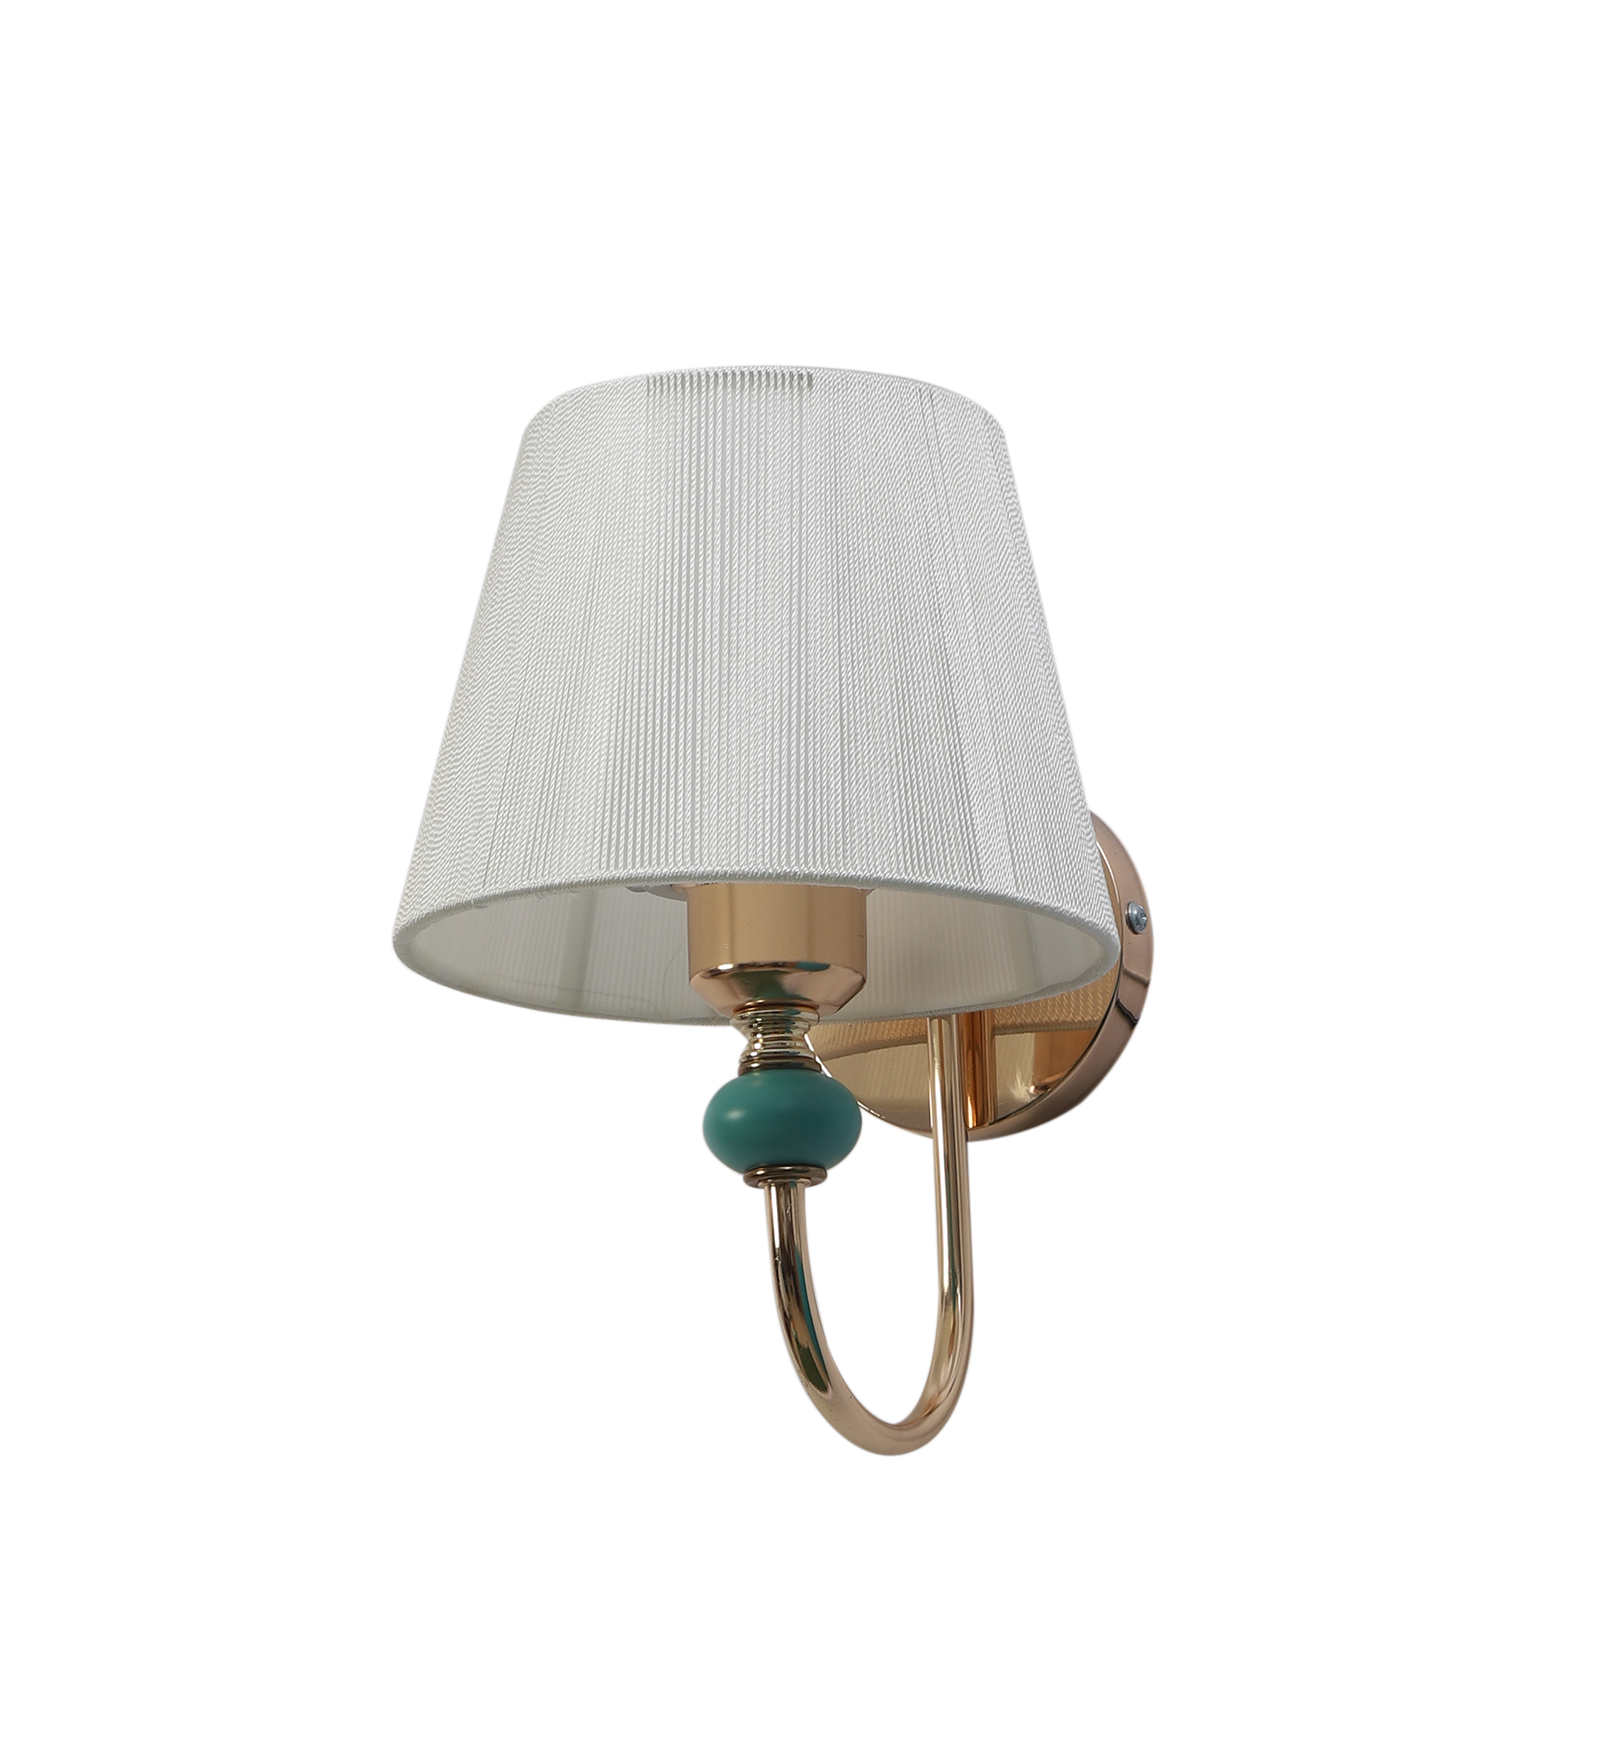 Buy Wall Mounted Bed Side Reading Lights and Lamps Online in India